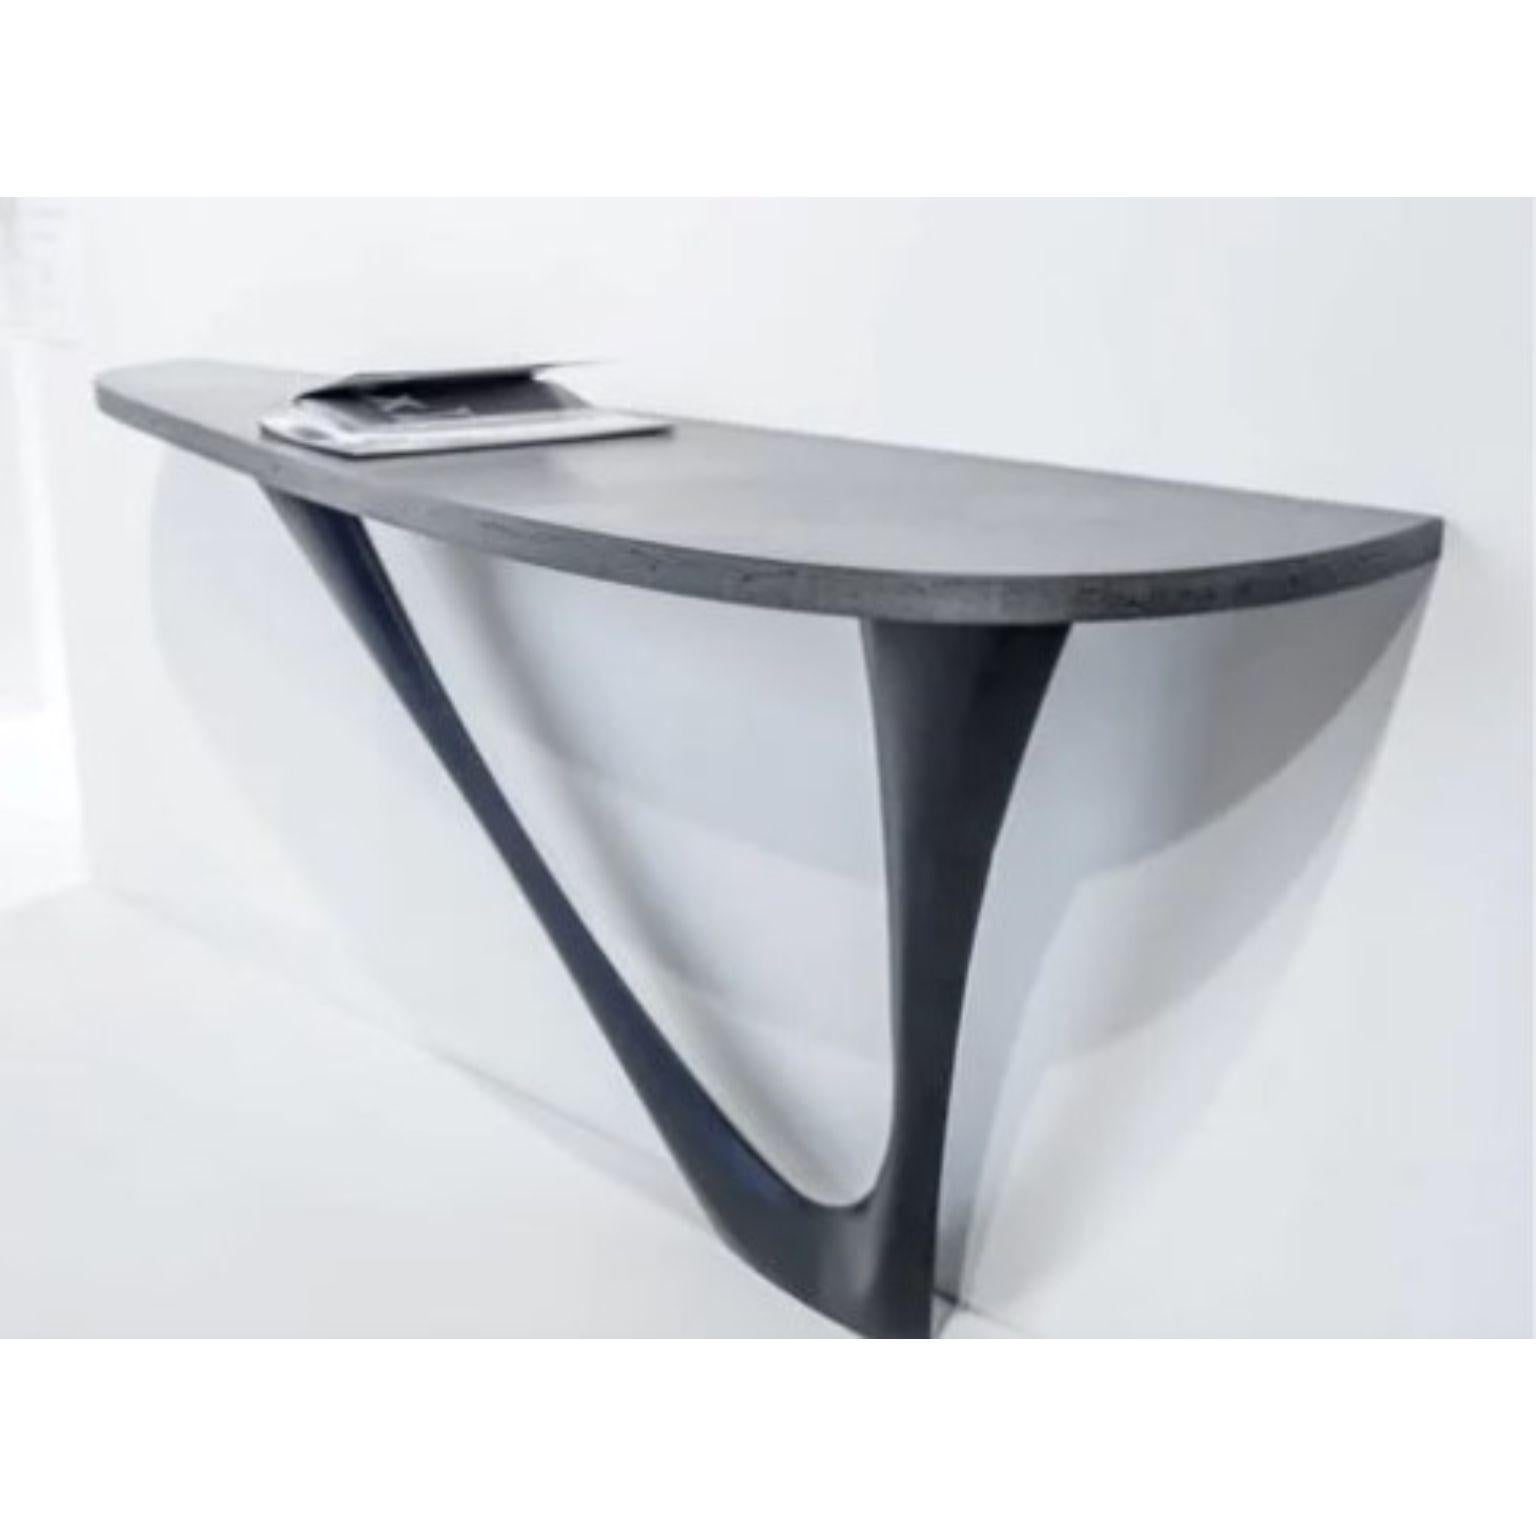 Umbra Grey G-Console Steel Base with Steel Top Mono by Zieta For Sale 1